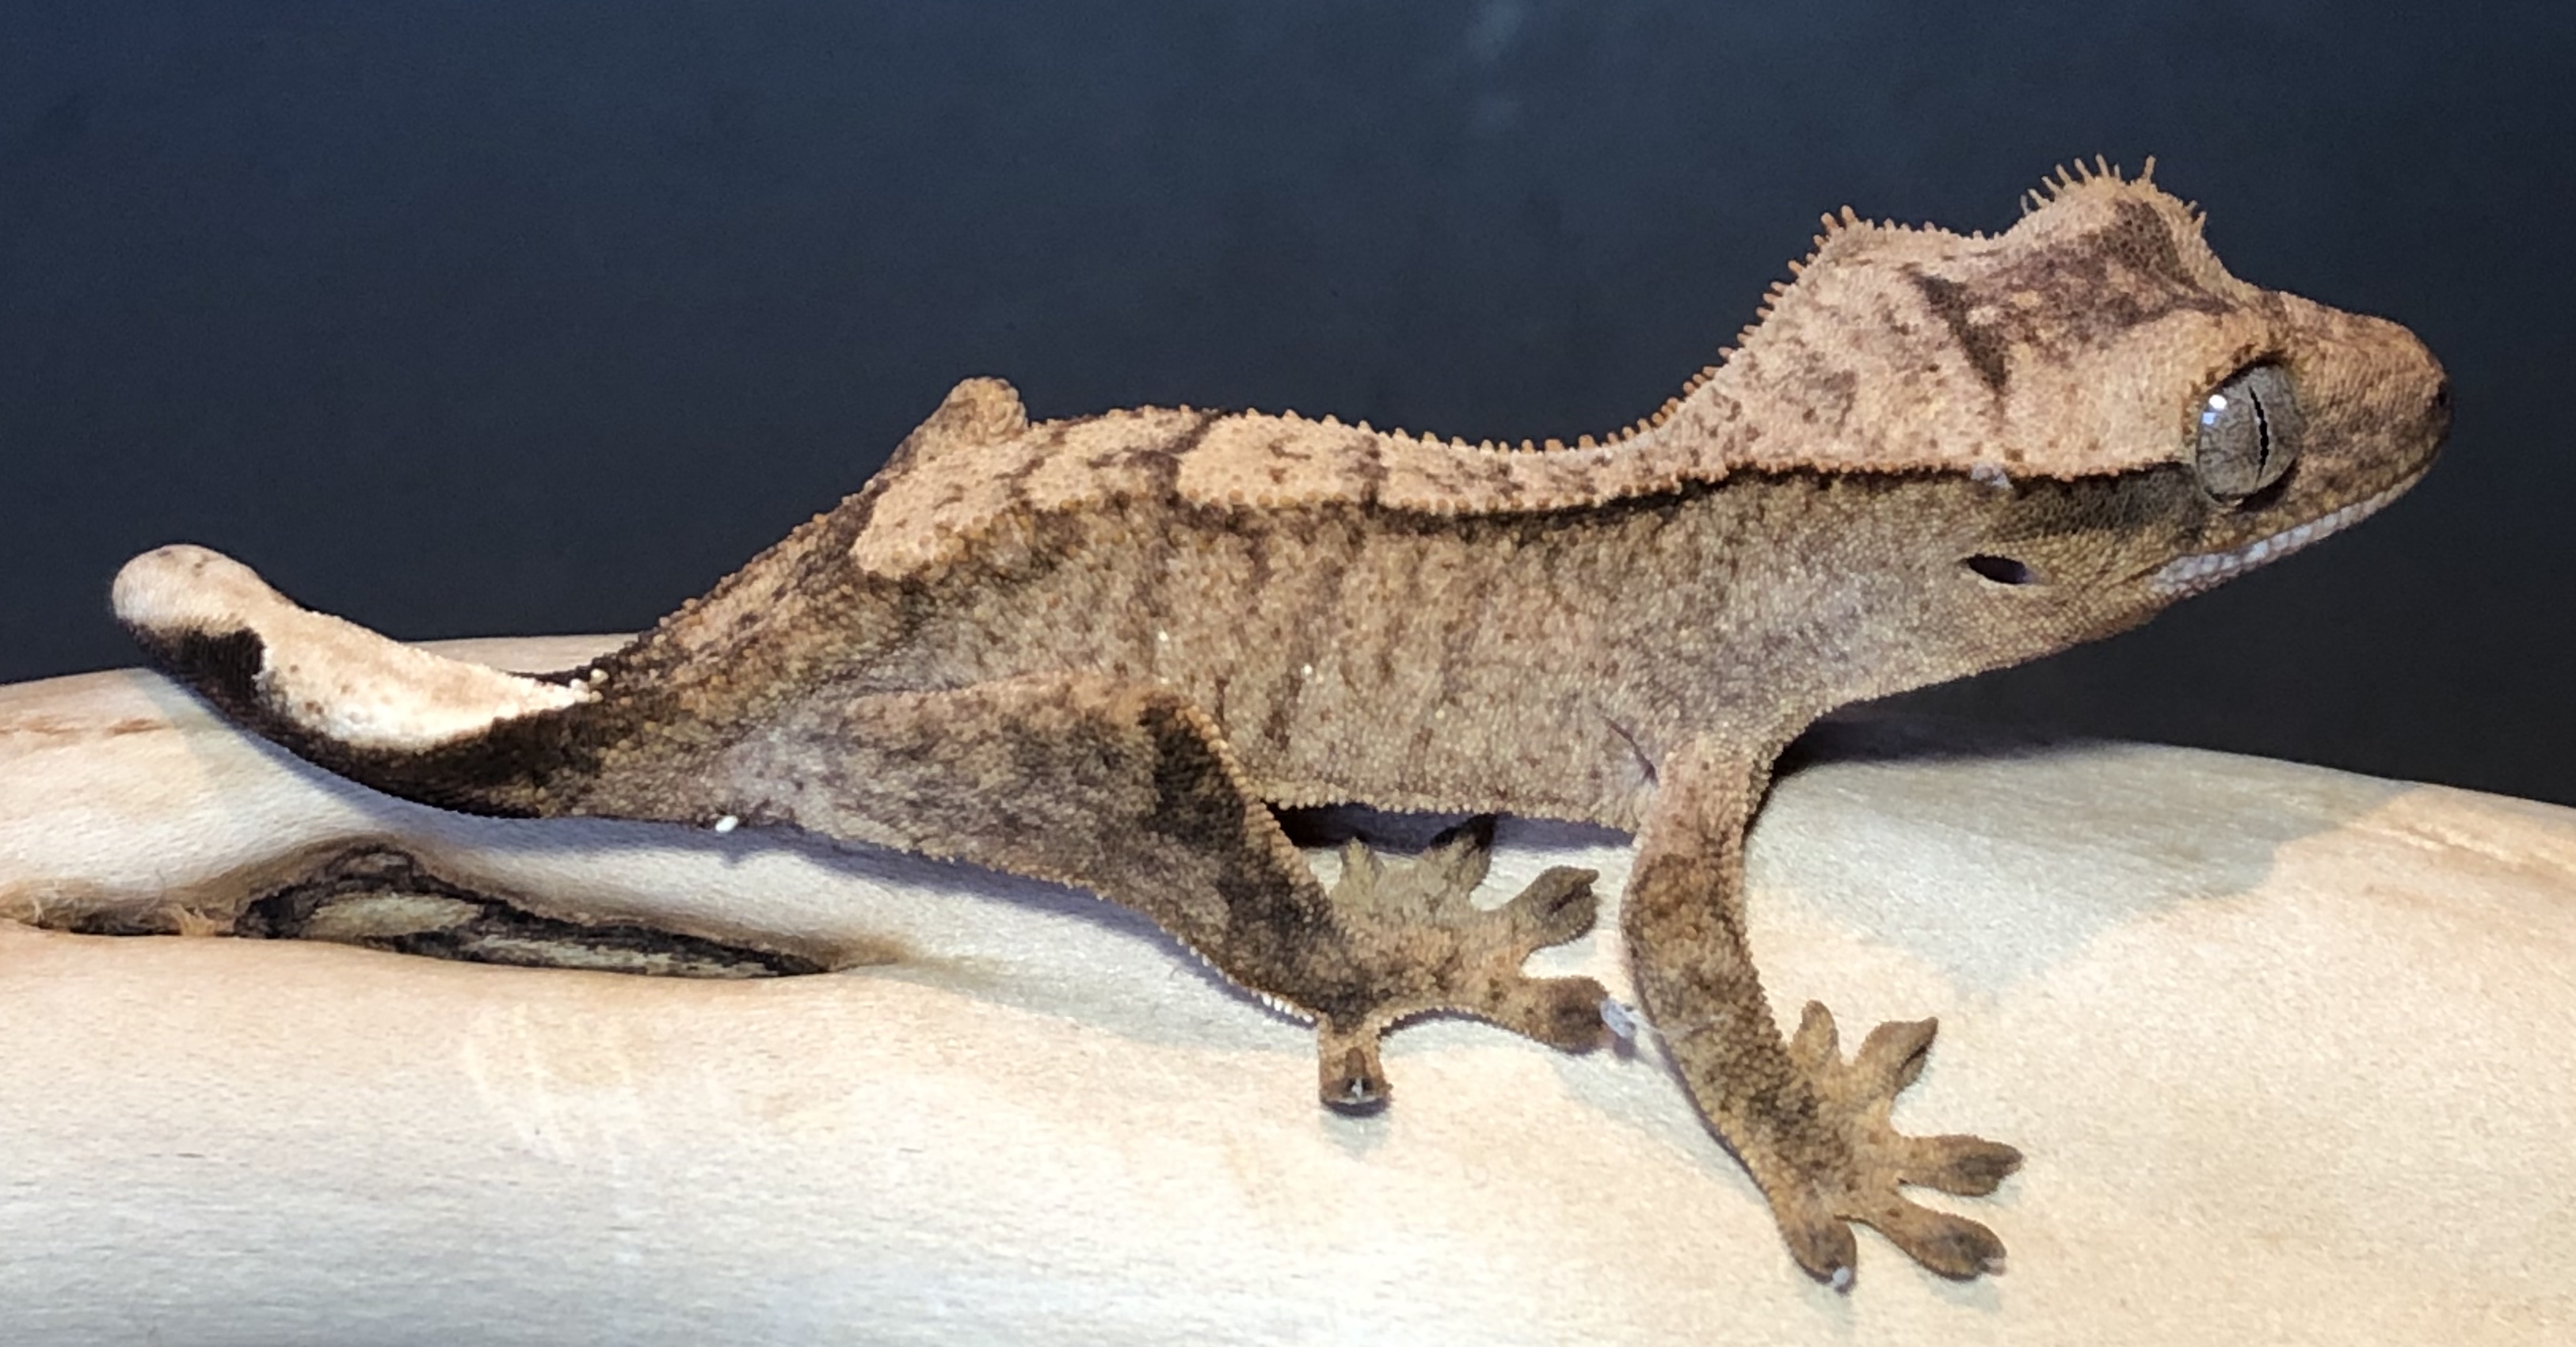 Brindle Crested Gecko by Geckozon